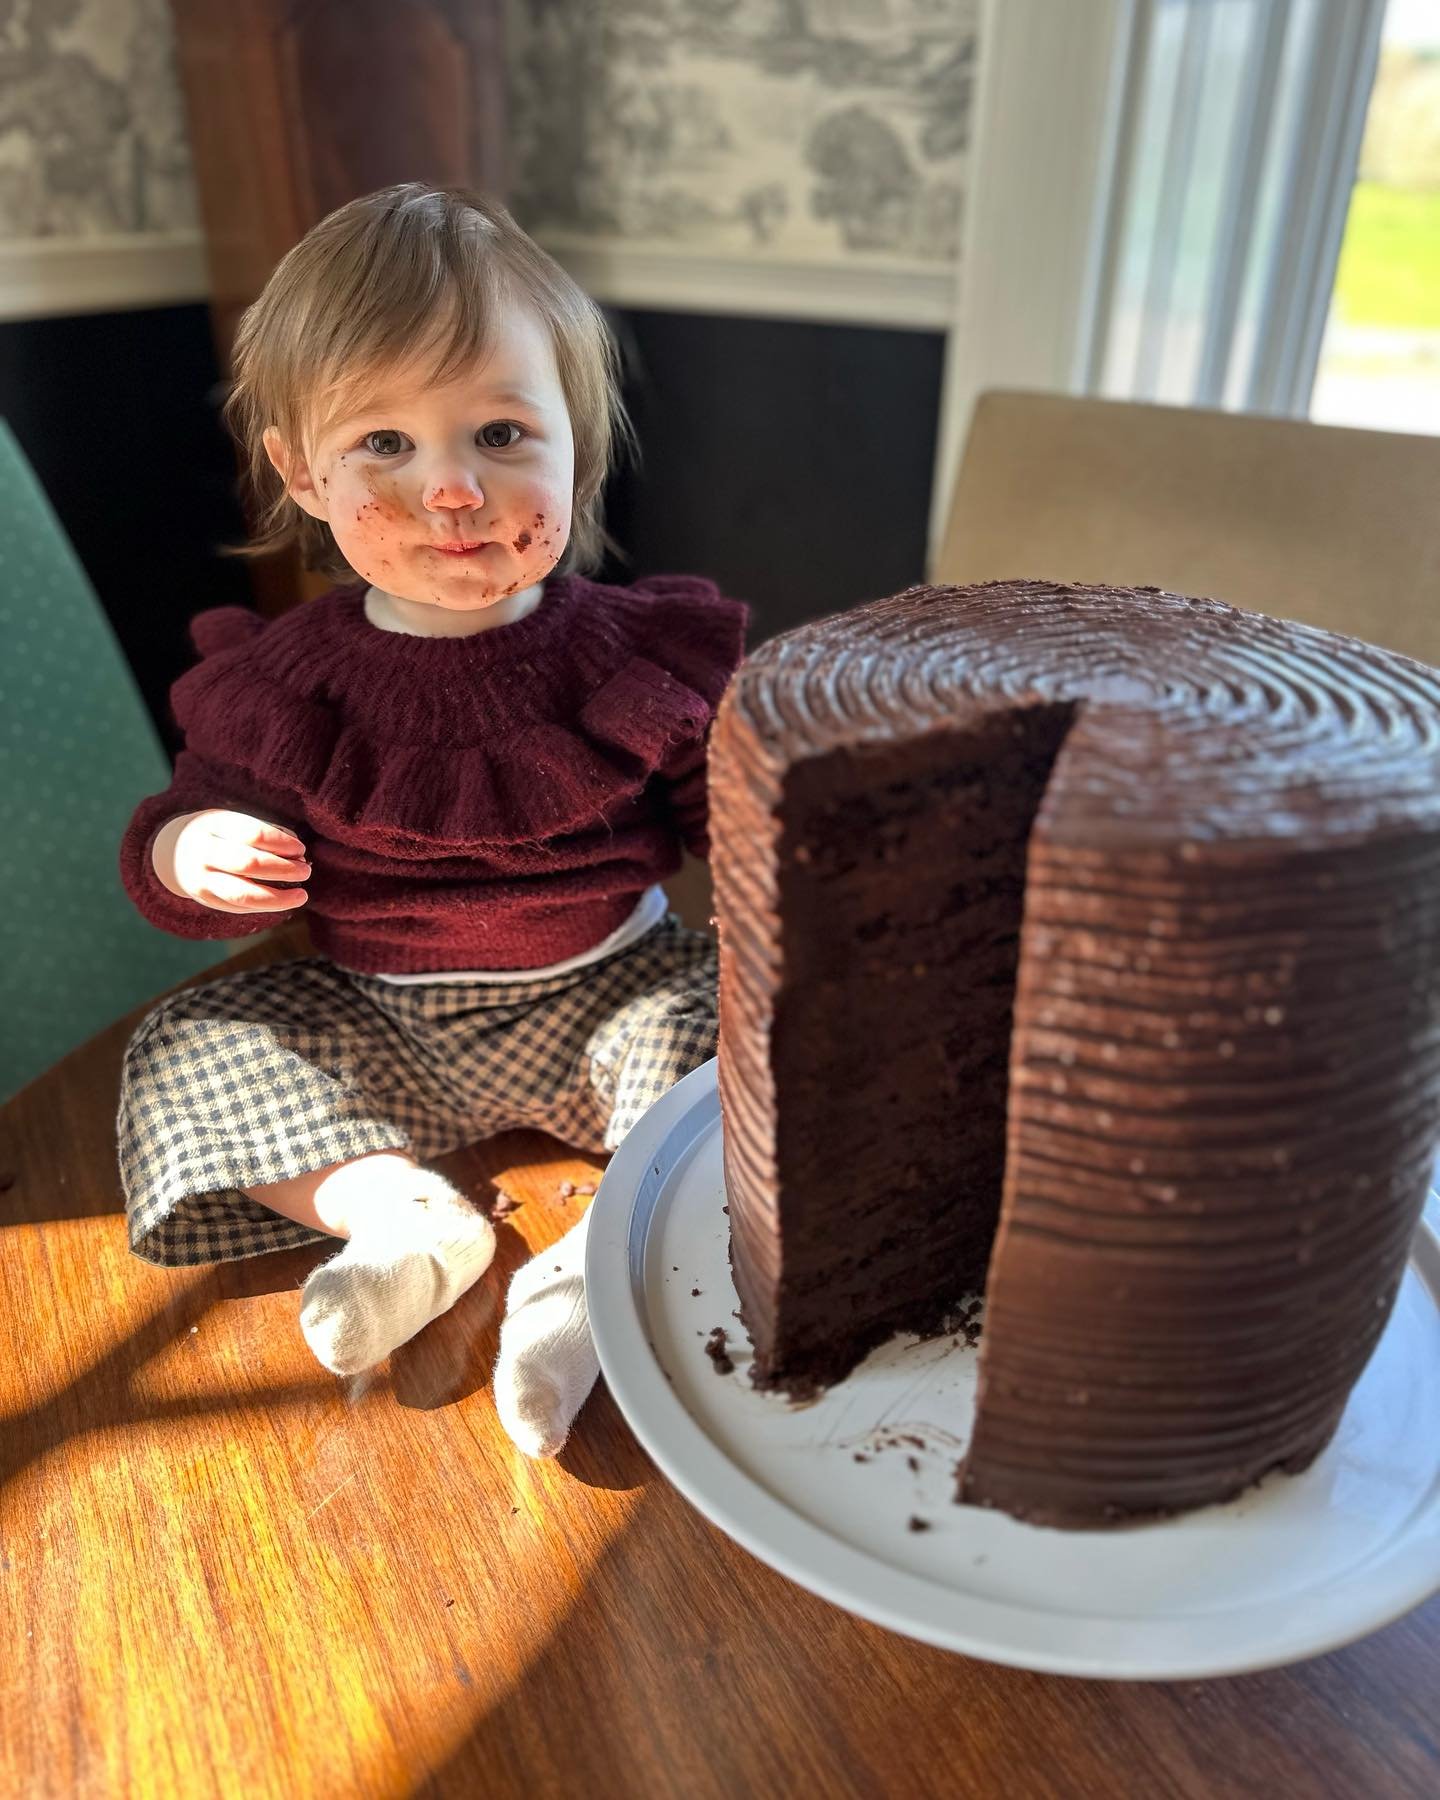 𝐖𝐨𝐖 𝐨𝐮𝐫 𝐅𝐢𝐫𝐬𝐭 𝐁𝐫𝐮𝐜𝐞 𝐂𝐚𝐤𝐞❤️❤️

Bruce Bogtrotter eat your heart out x

Our superb Chef Thomas Roberts has really done us proud with this incredible&hellip;.
&ldquo;Bruce Cake&rdquo;&hellip; layer upon layer of Chocolatey deliciousne